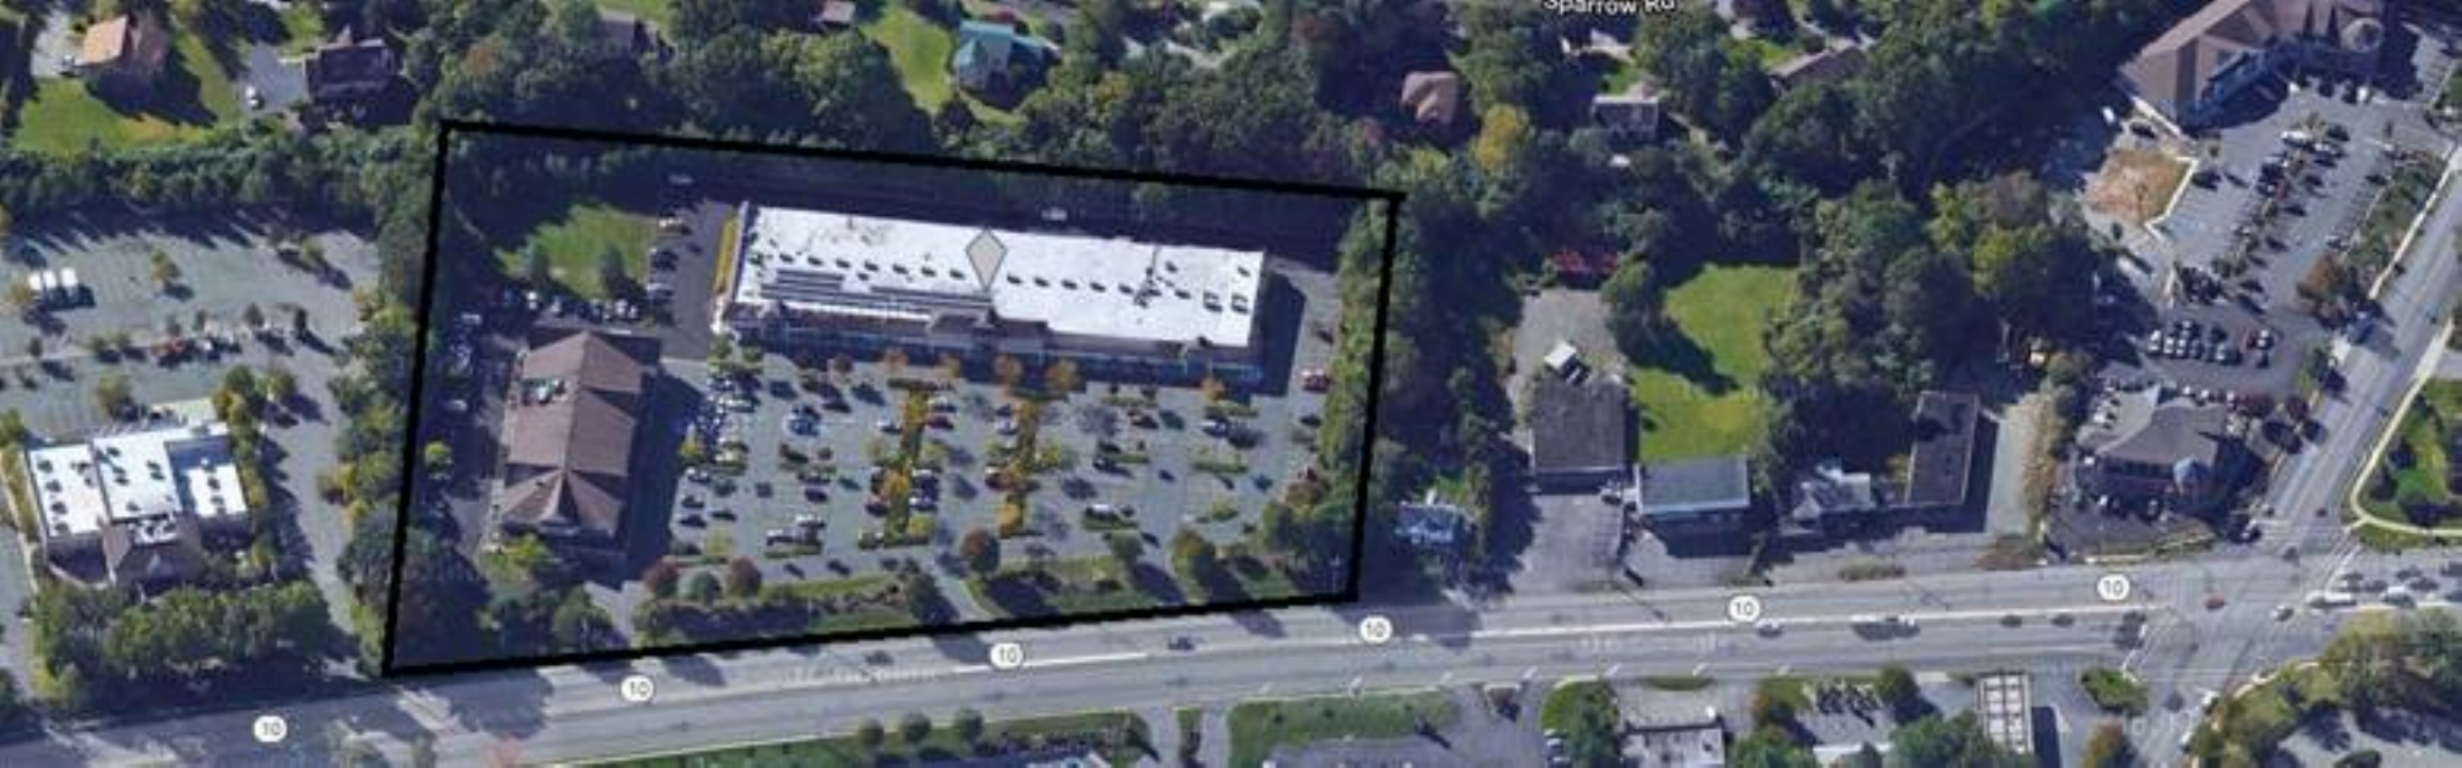 Under Contract - INVESTMENT SALE 66,750 SF